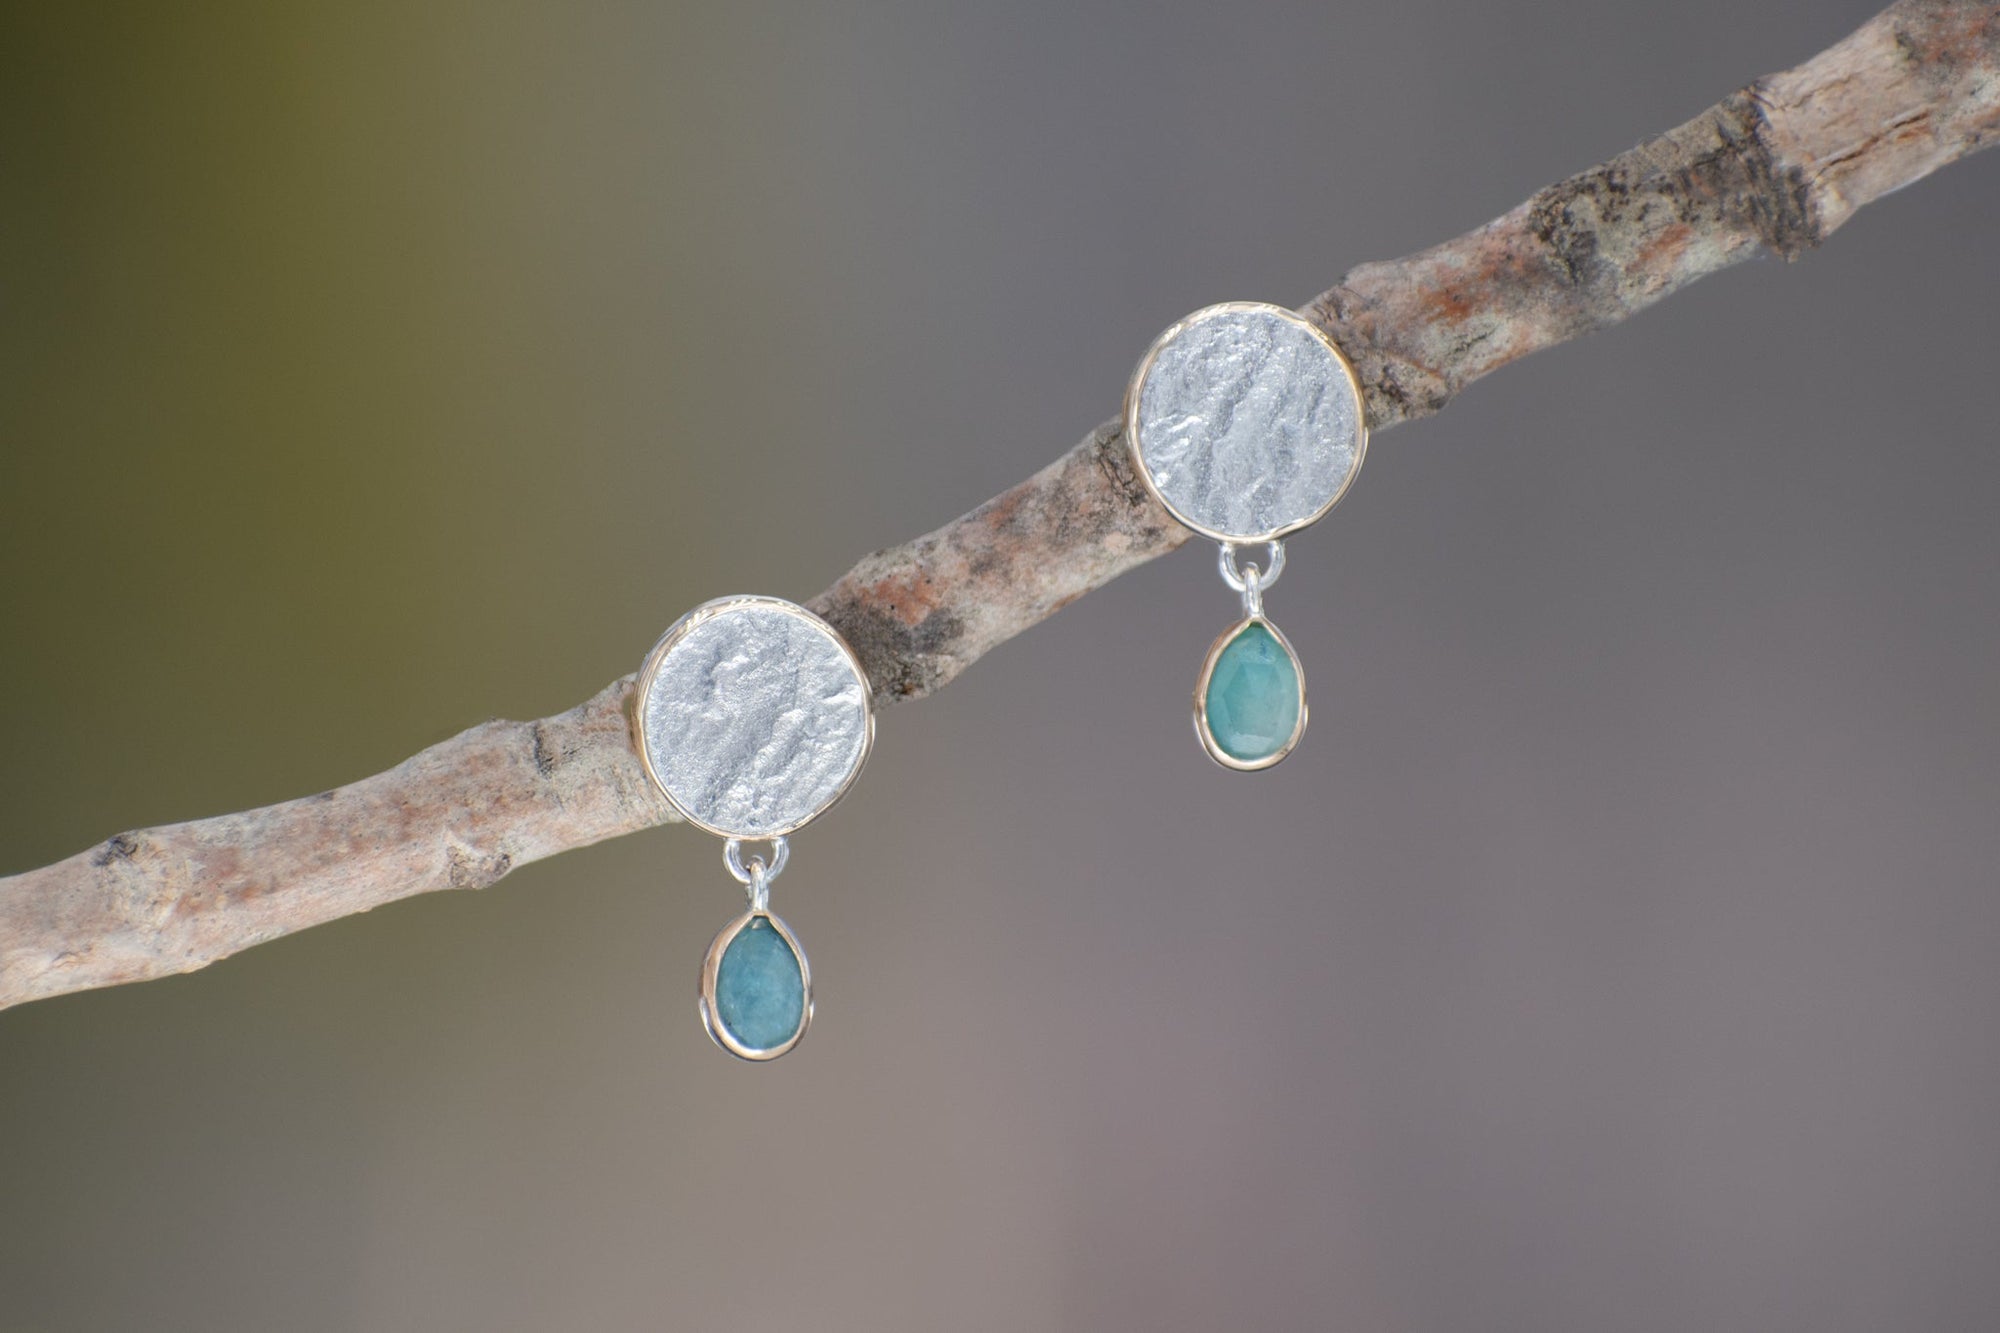 Mountain Texture Earrings with Grandidierite